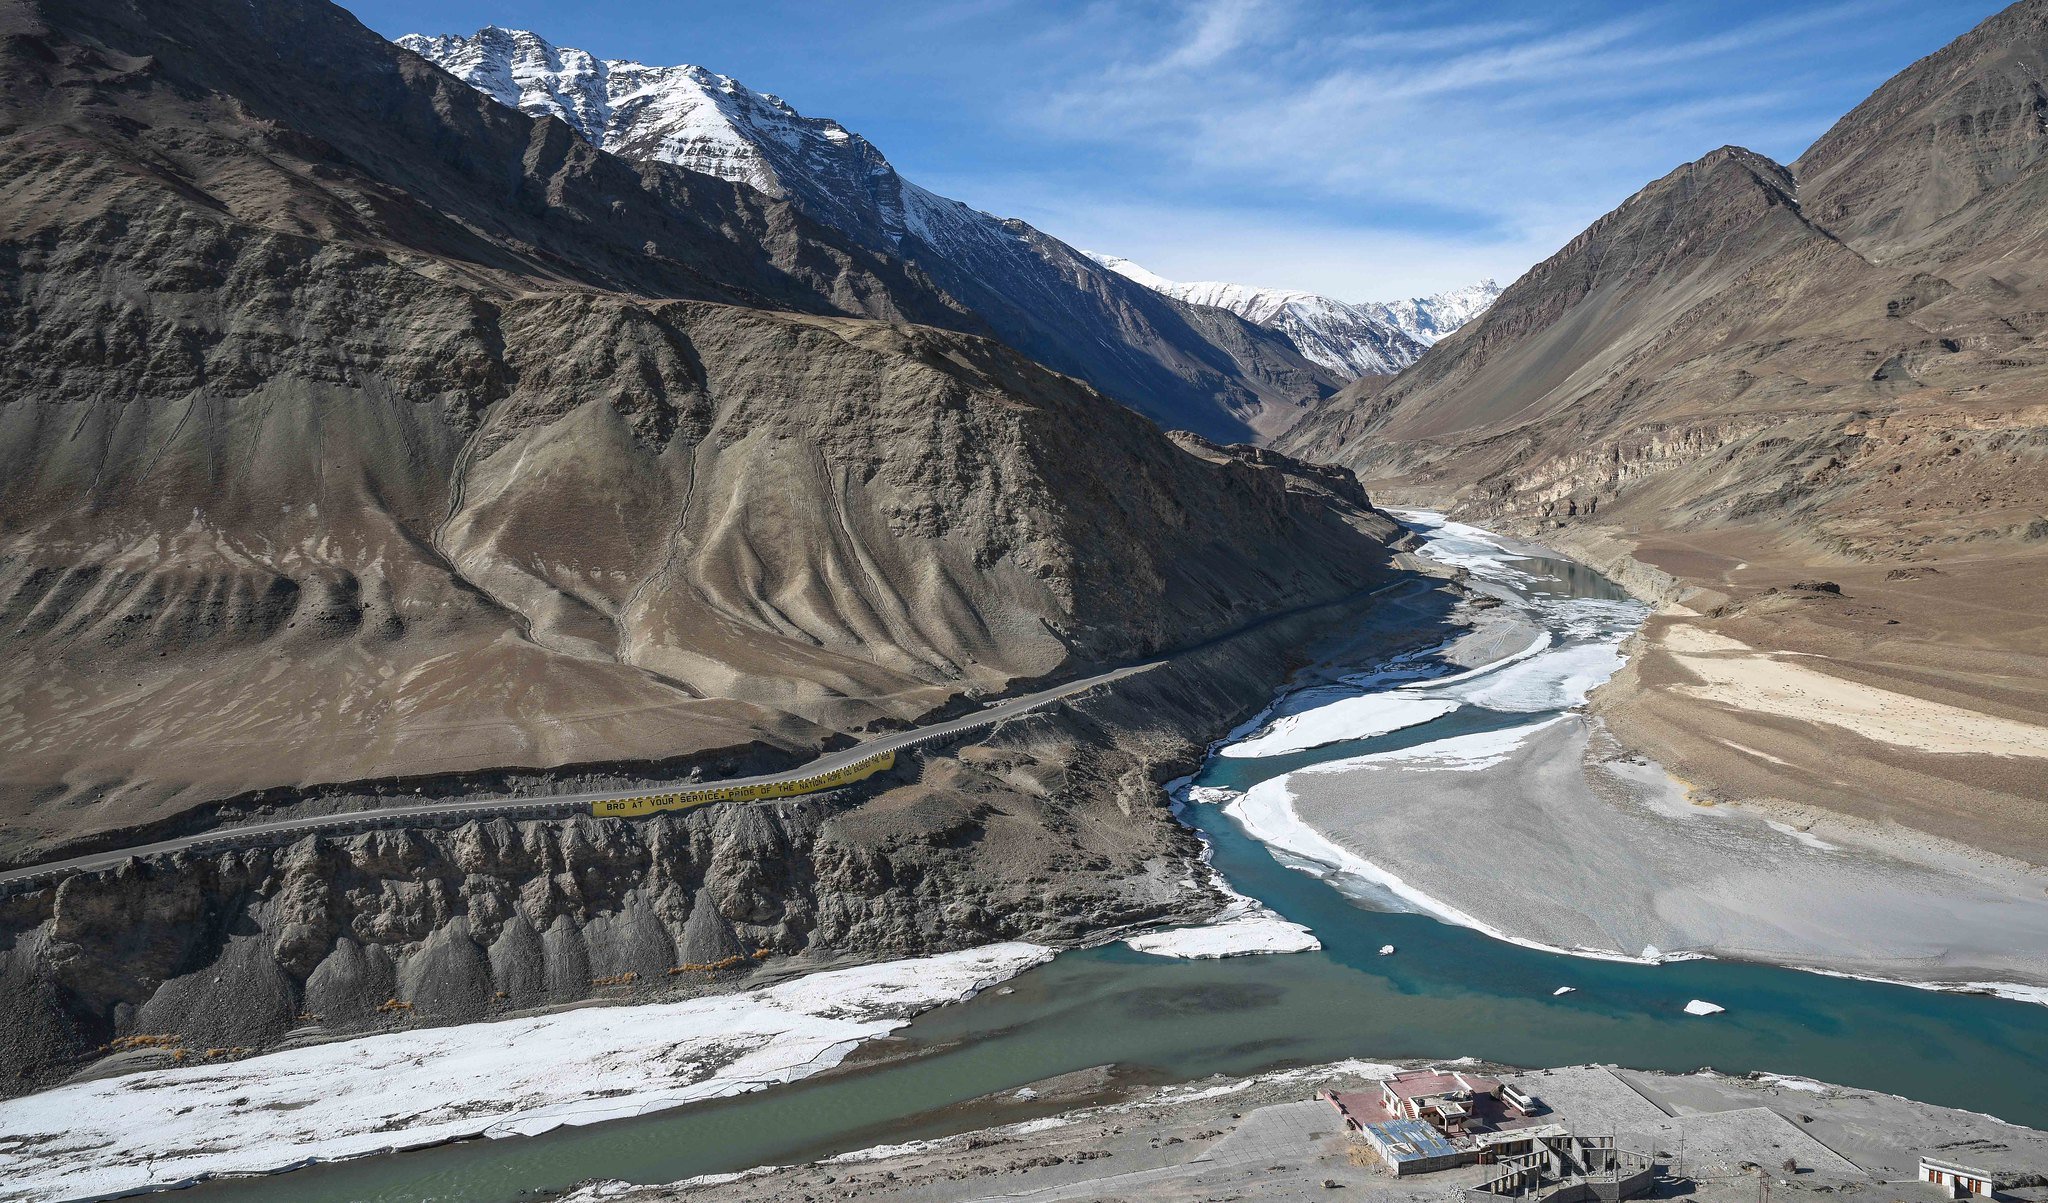 <p>Confluence of Indus River and Zanskar rivers originating in the high Himalayas</p>